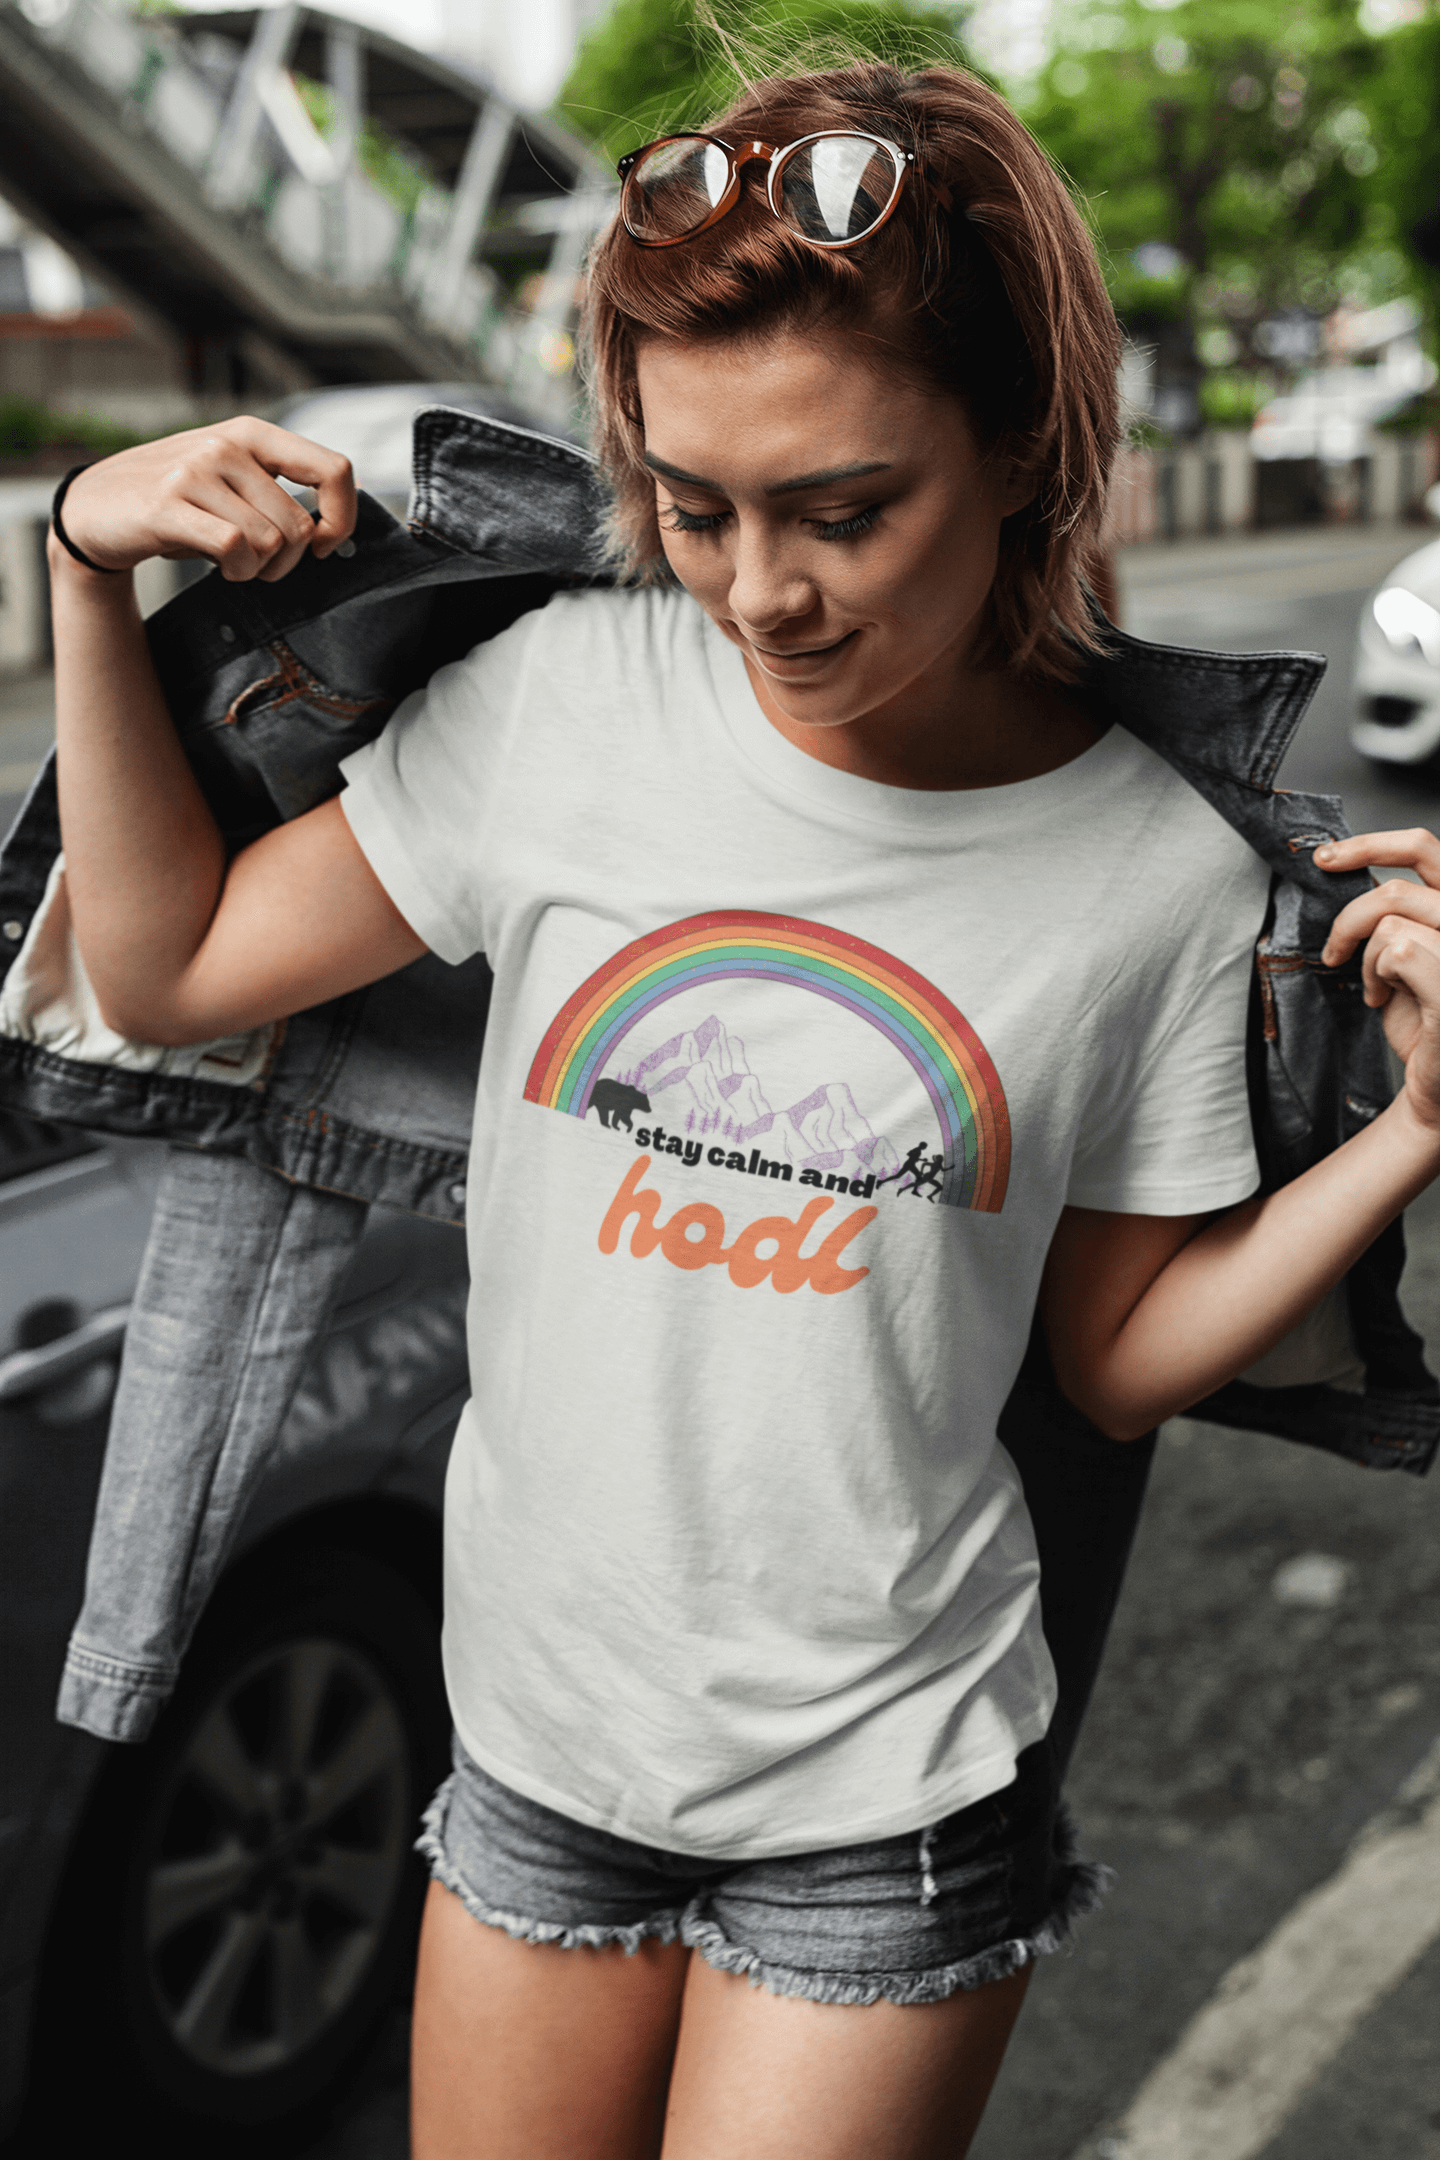 Short haired woman wearing "Stay Calm and HODL" NFT T-Shirt